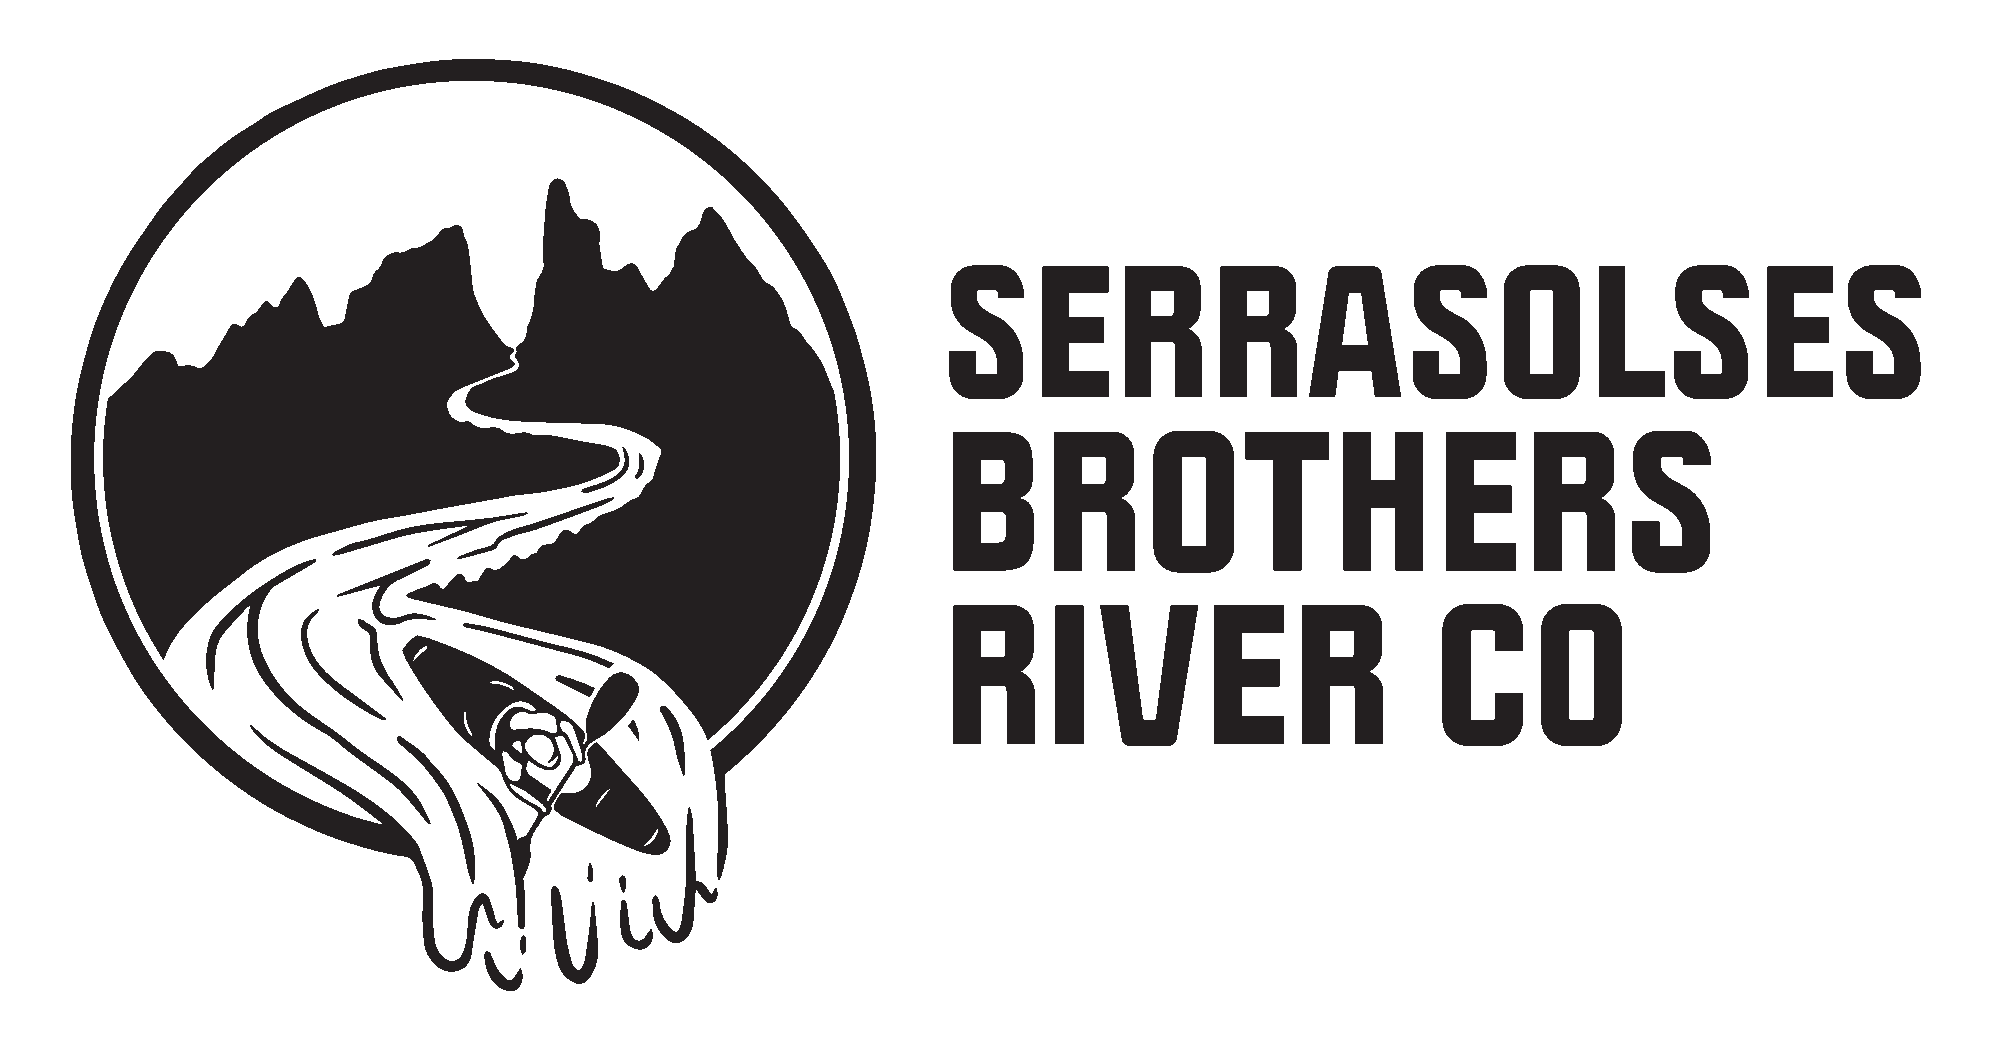 Serrasolses Brothers River Co